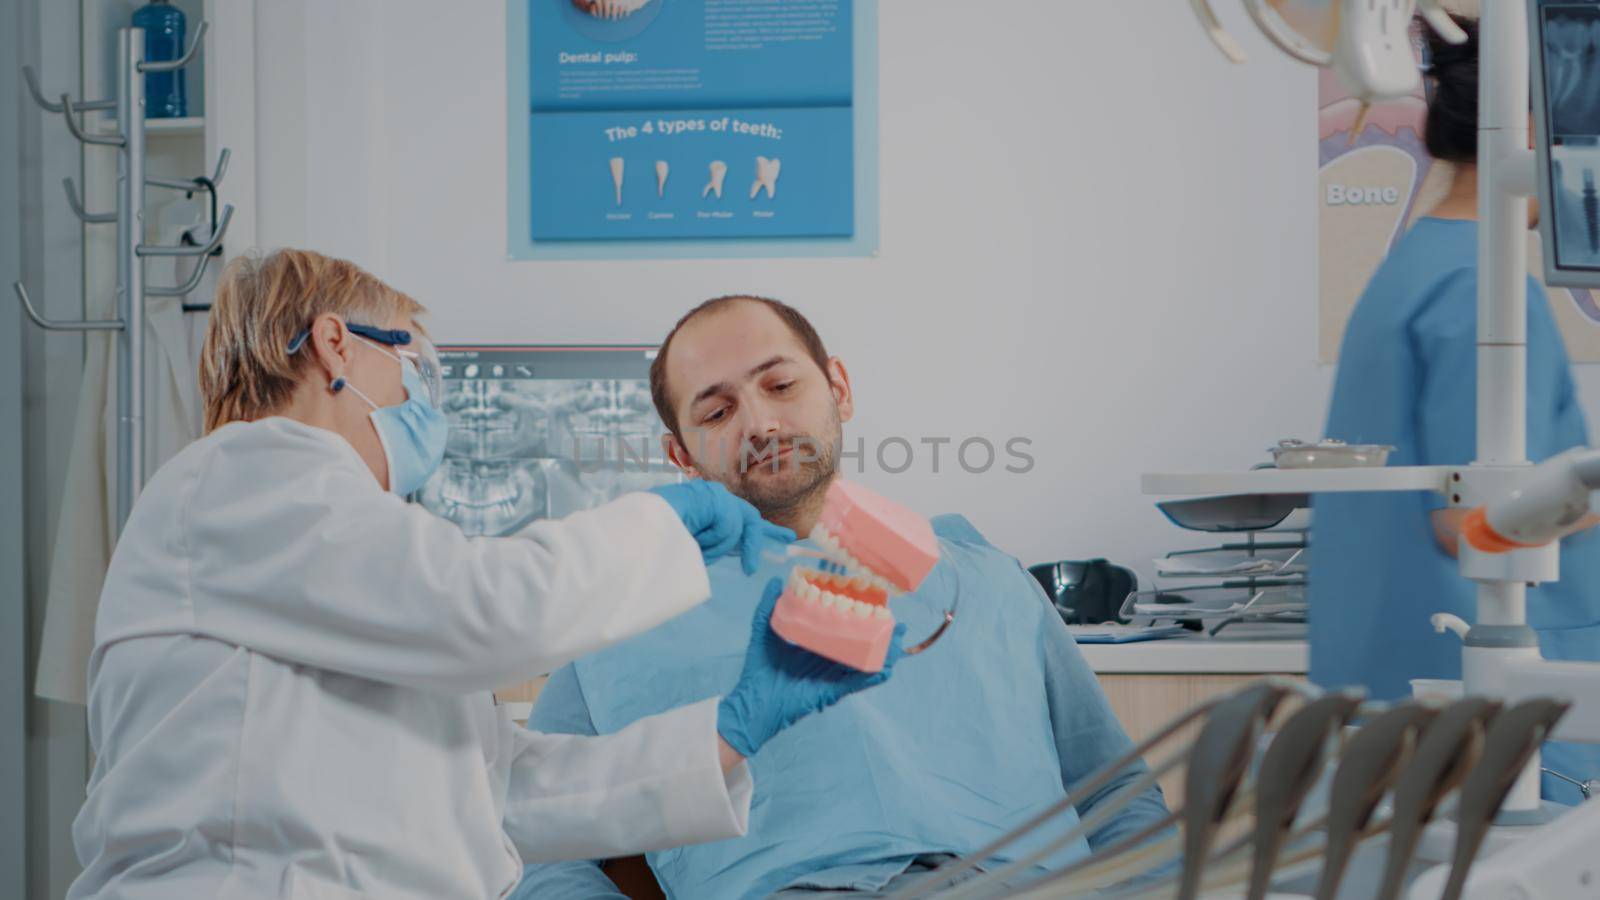 Stomatologist using artificial jaw to explain correct way to brush teeth, doing oral care lesson with patient. Dentist teaching man to use toothbrush to prevent caries and toothache. Teach hygiene